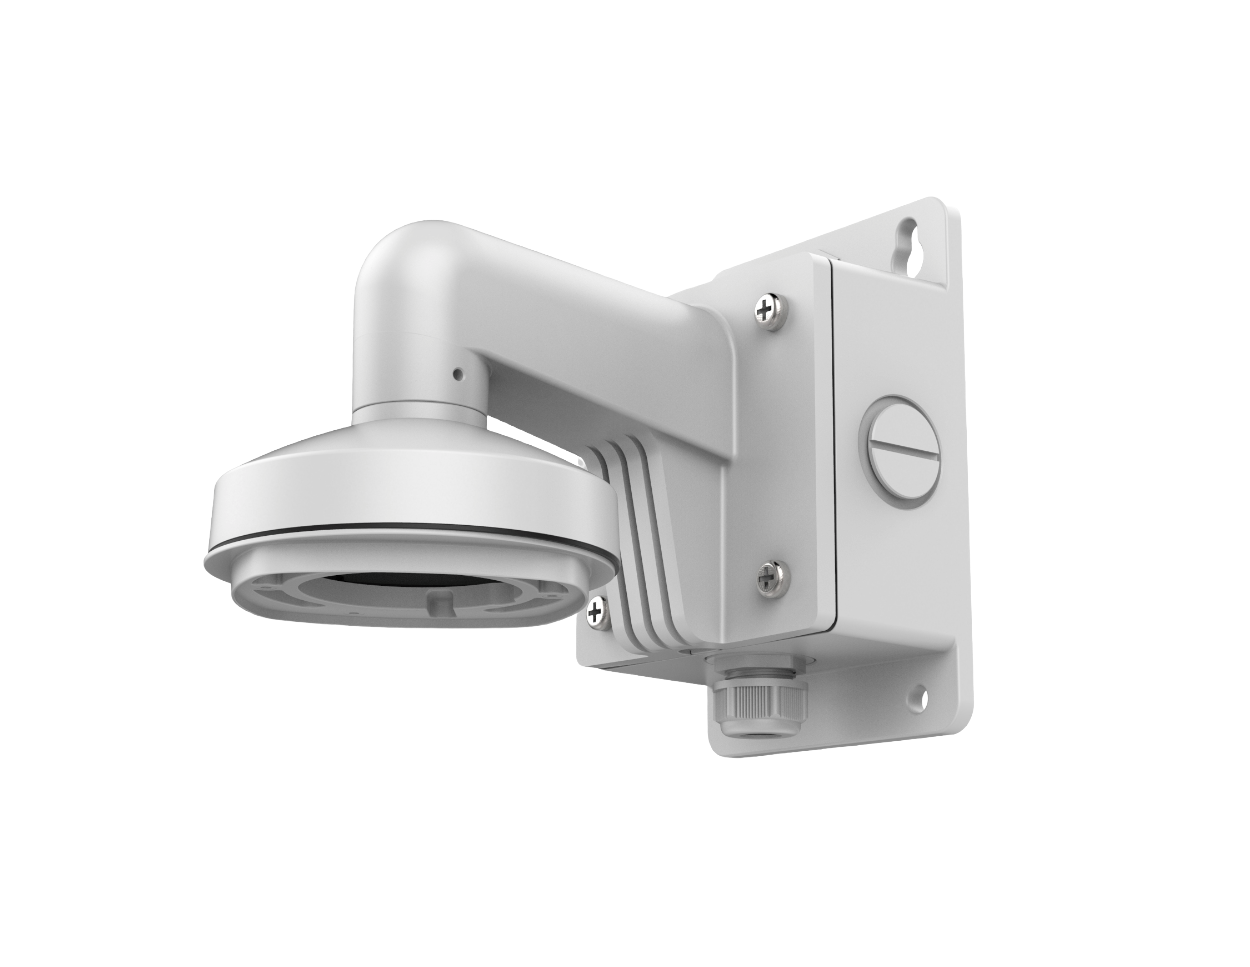 HIKVISION DS-1272ZJ-120B - Wall Mount Bracket for Mini Dome Camera